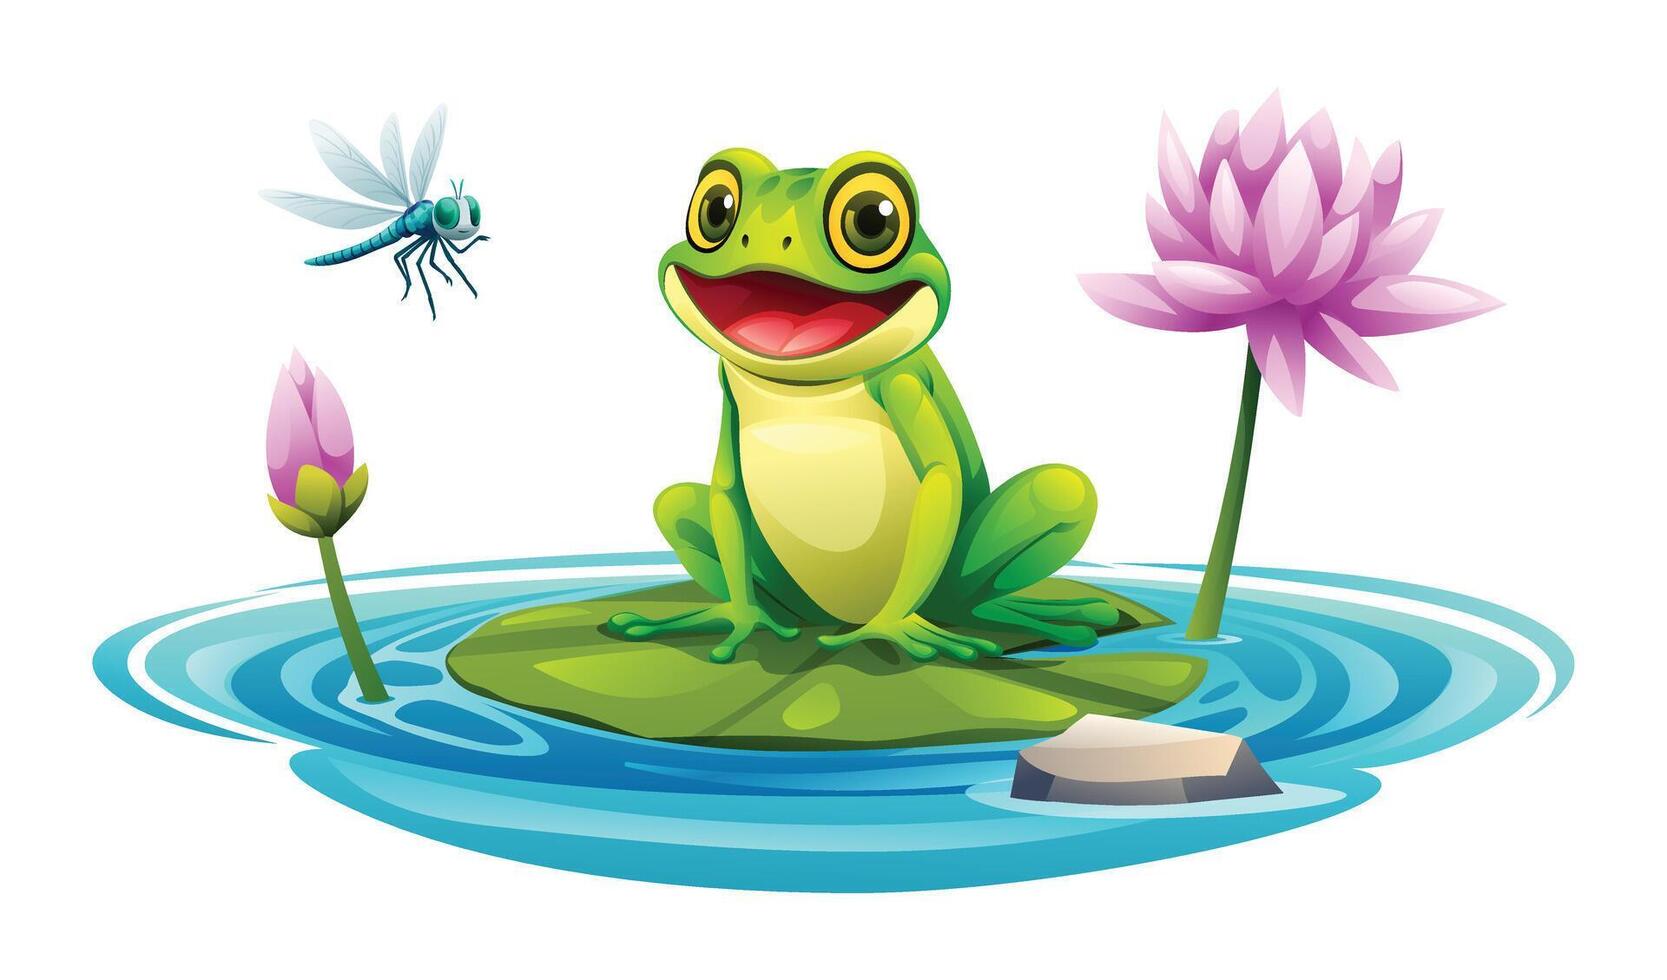 Frog sitting on a leaf in a pond with water lily and dragonfly. Vector cartoon illustration isolated on white background